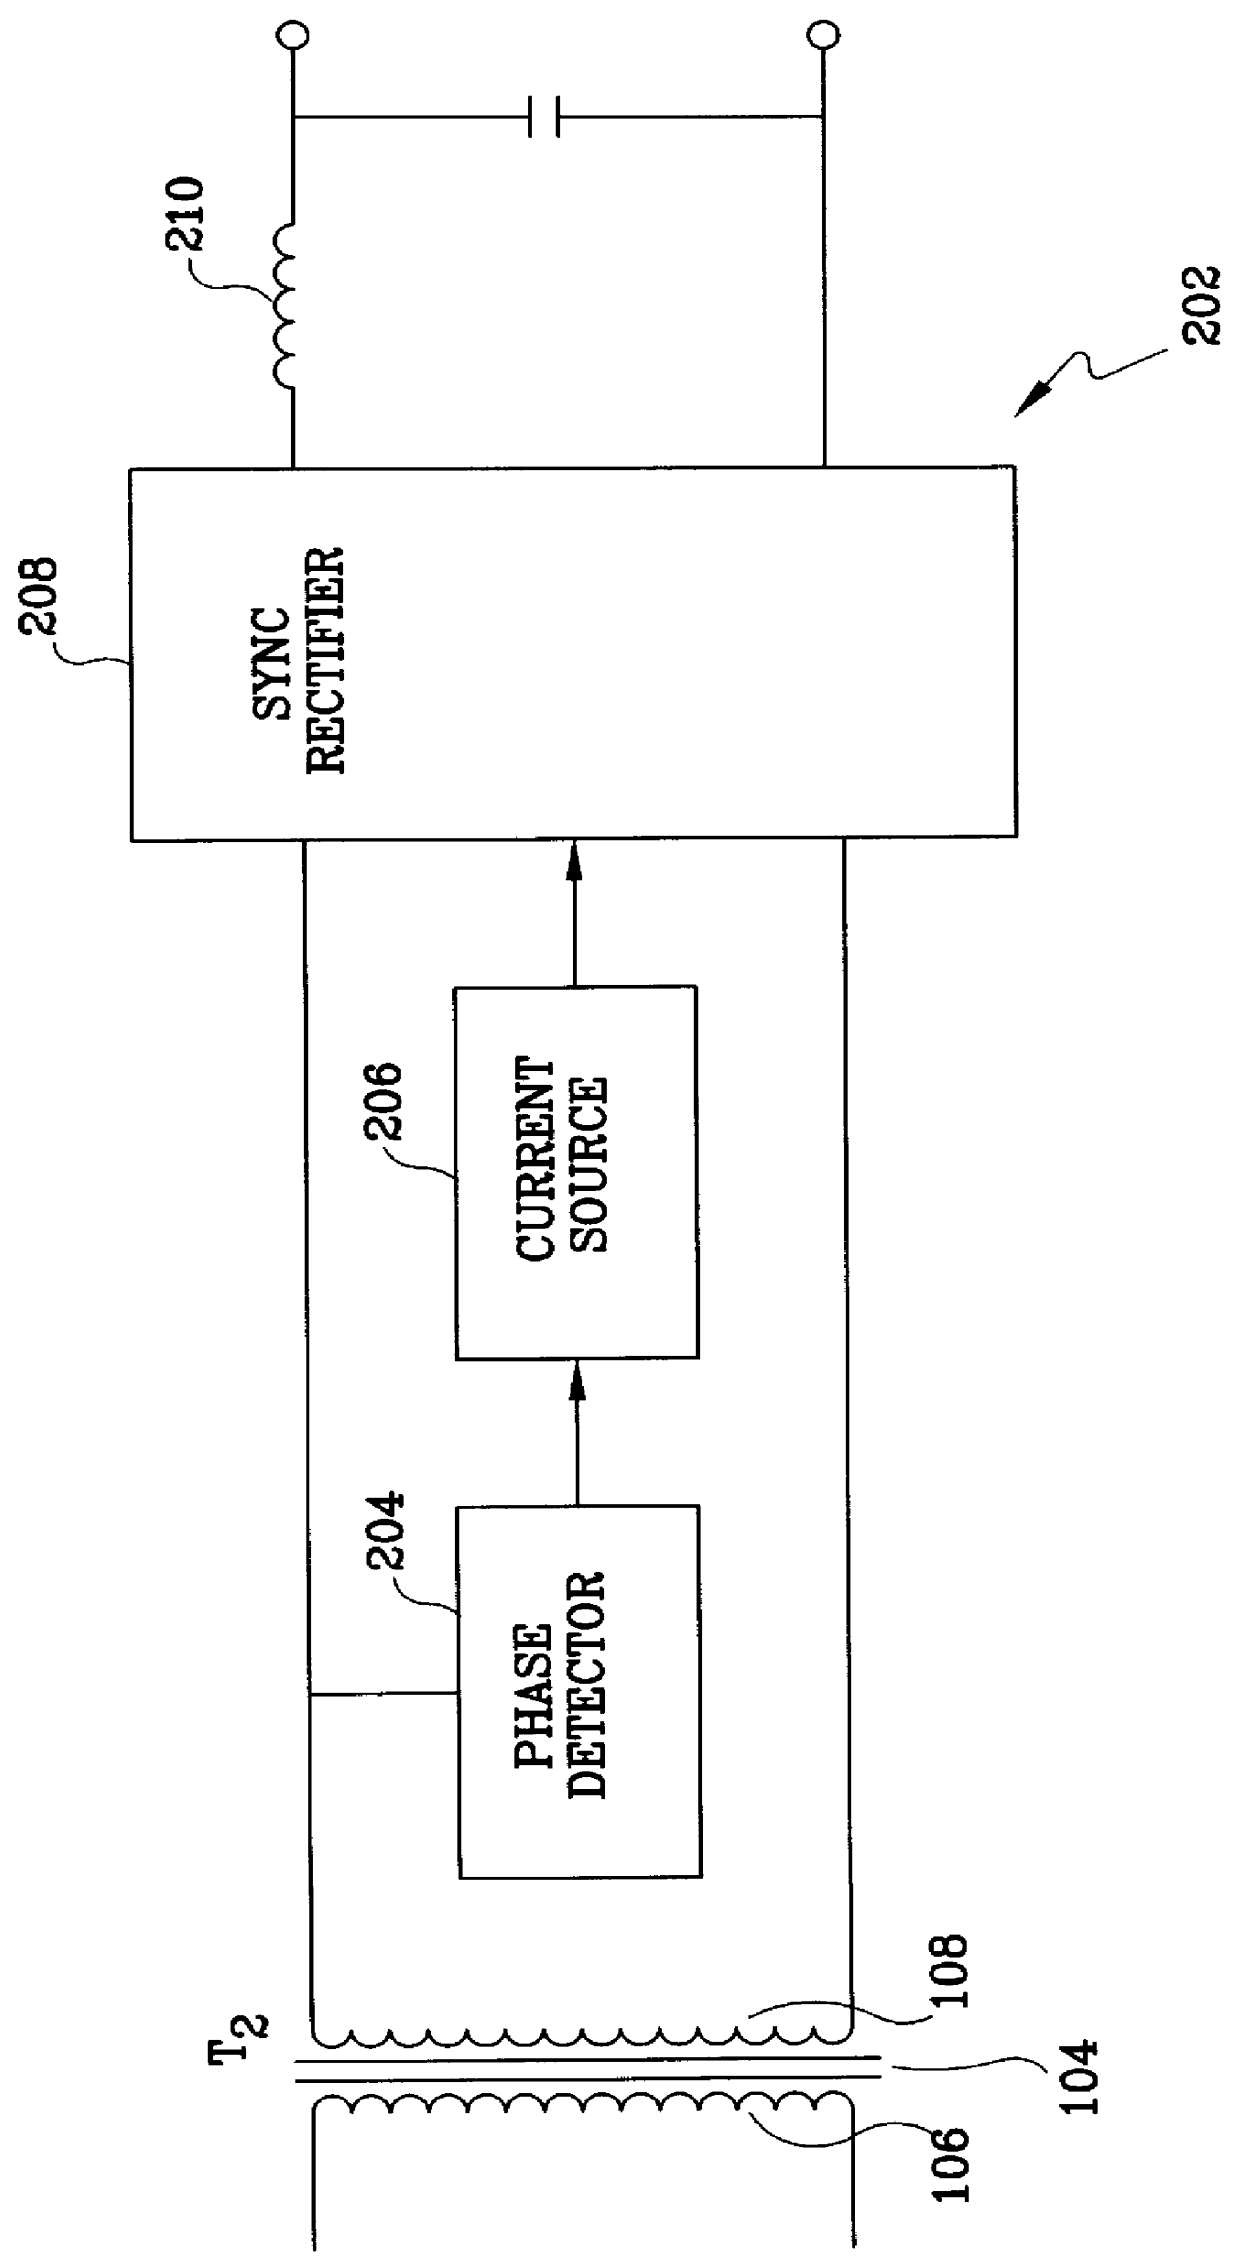 Integrated synchronous rectifier for power supplies